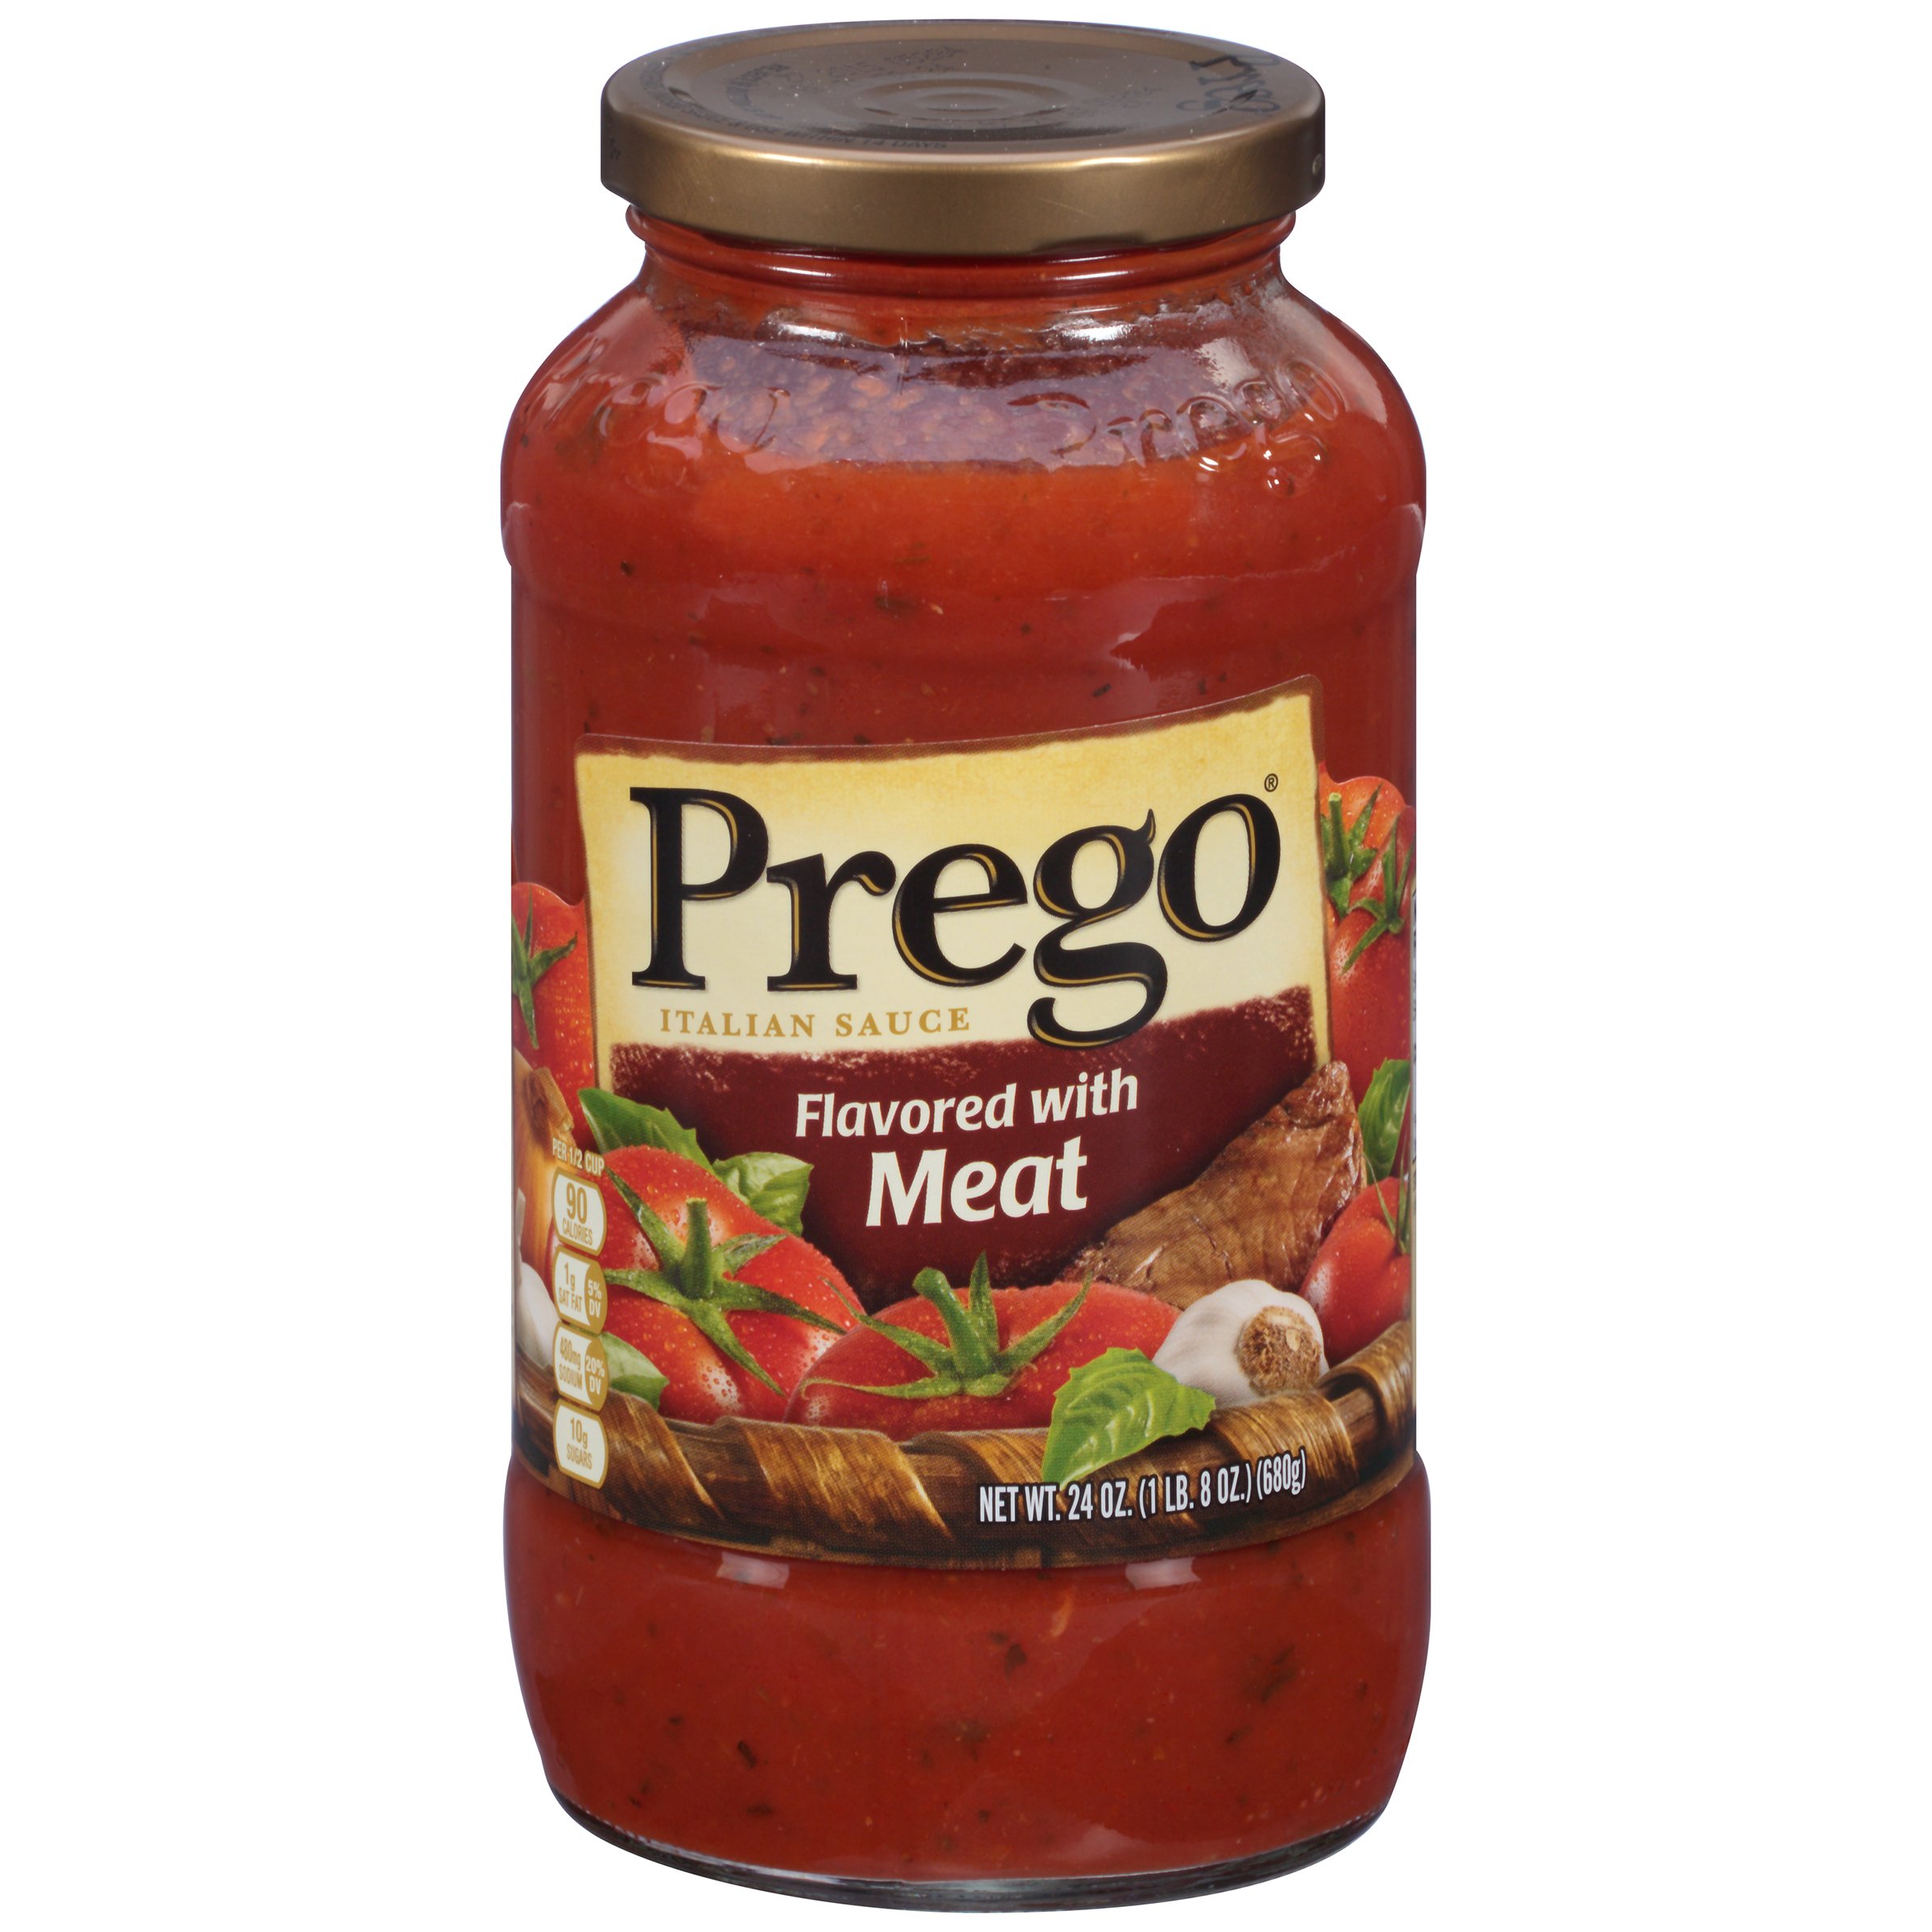 Prego Flavored with Meat Italian Sauce